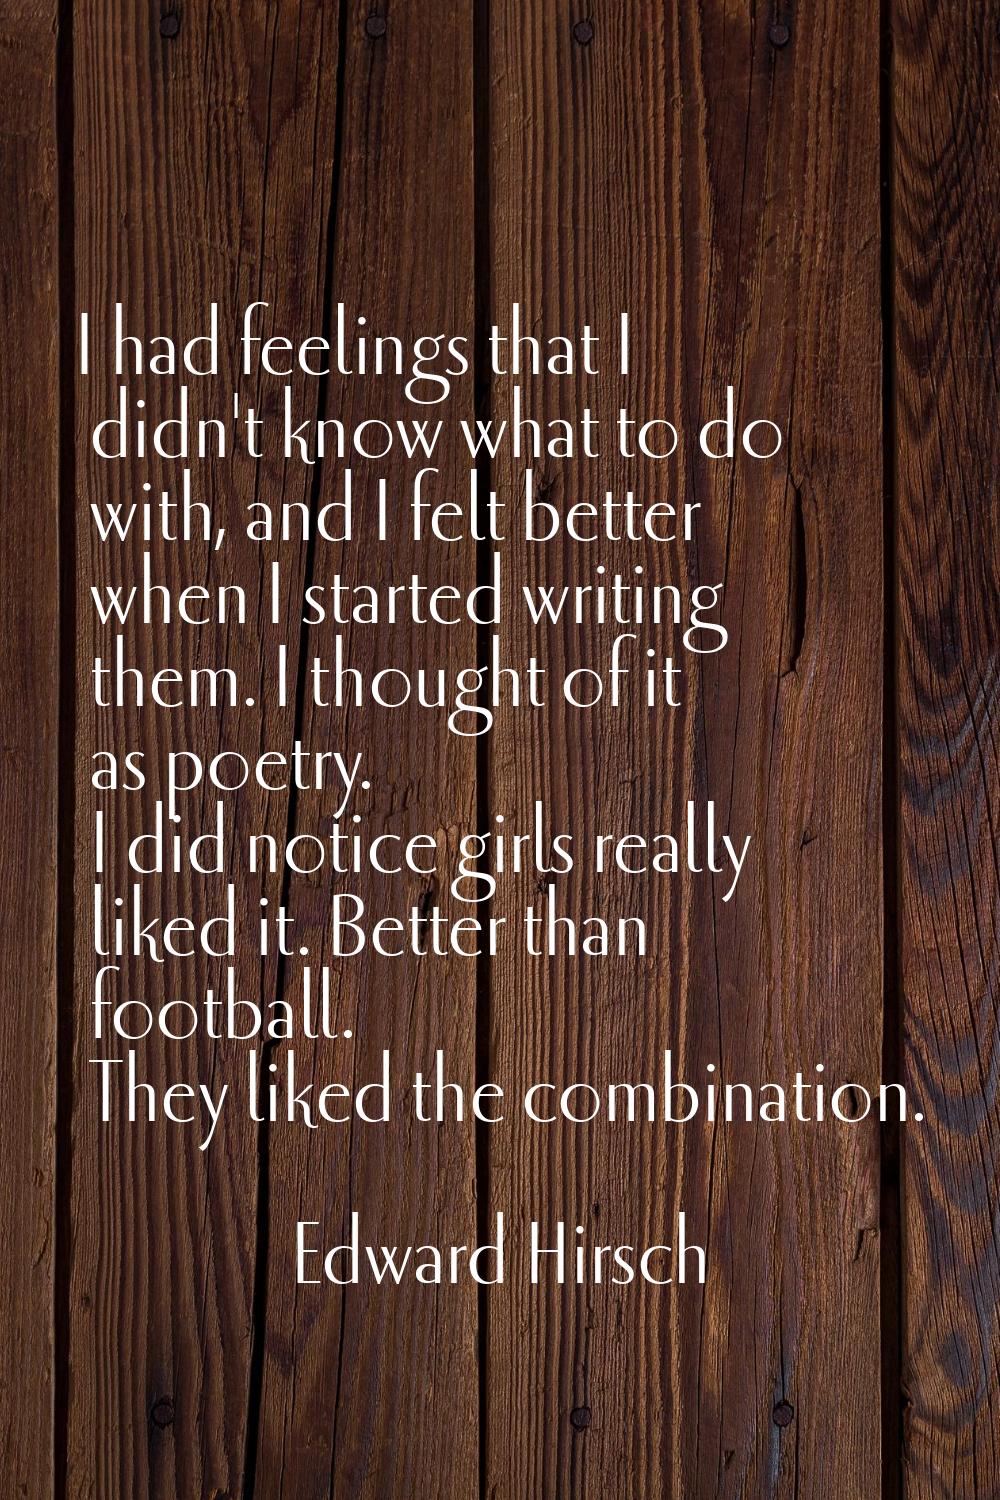 I had feelings that I didn't know what to do with, and I felt better when I started writing them. I